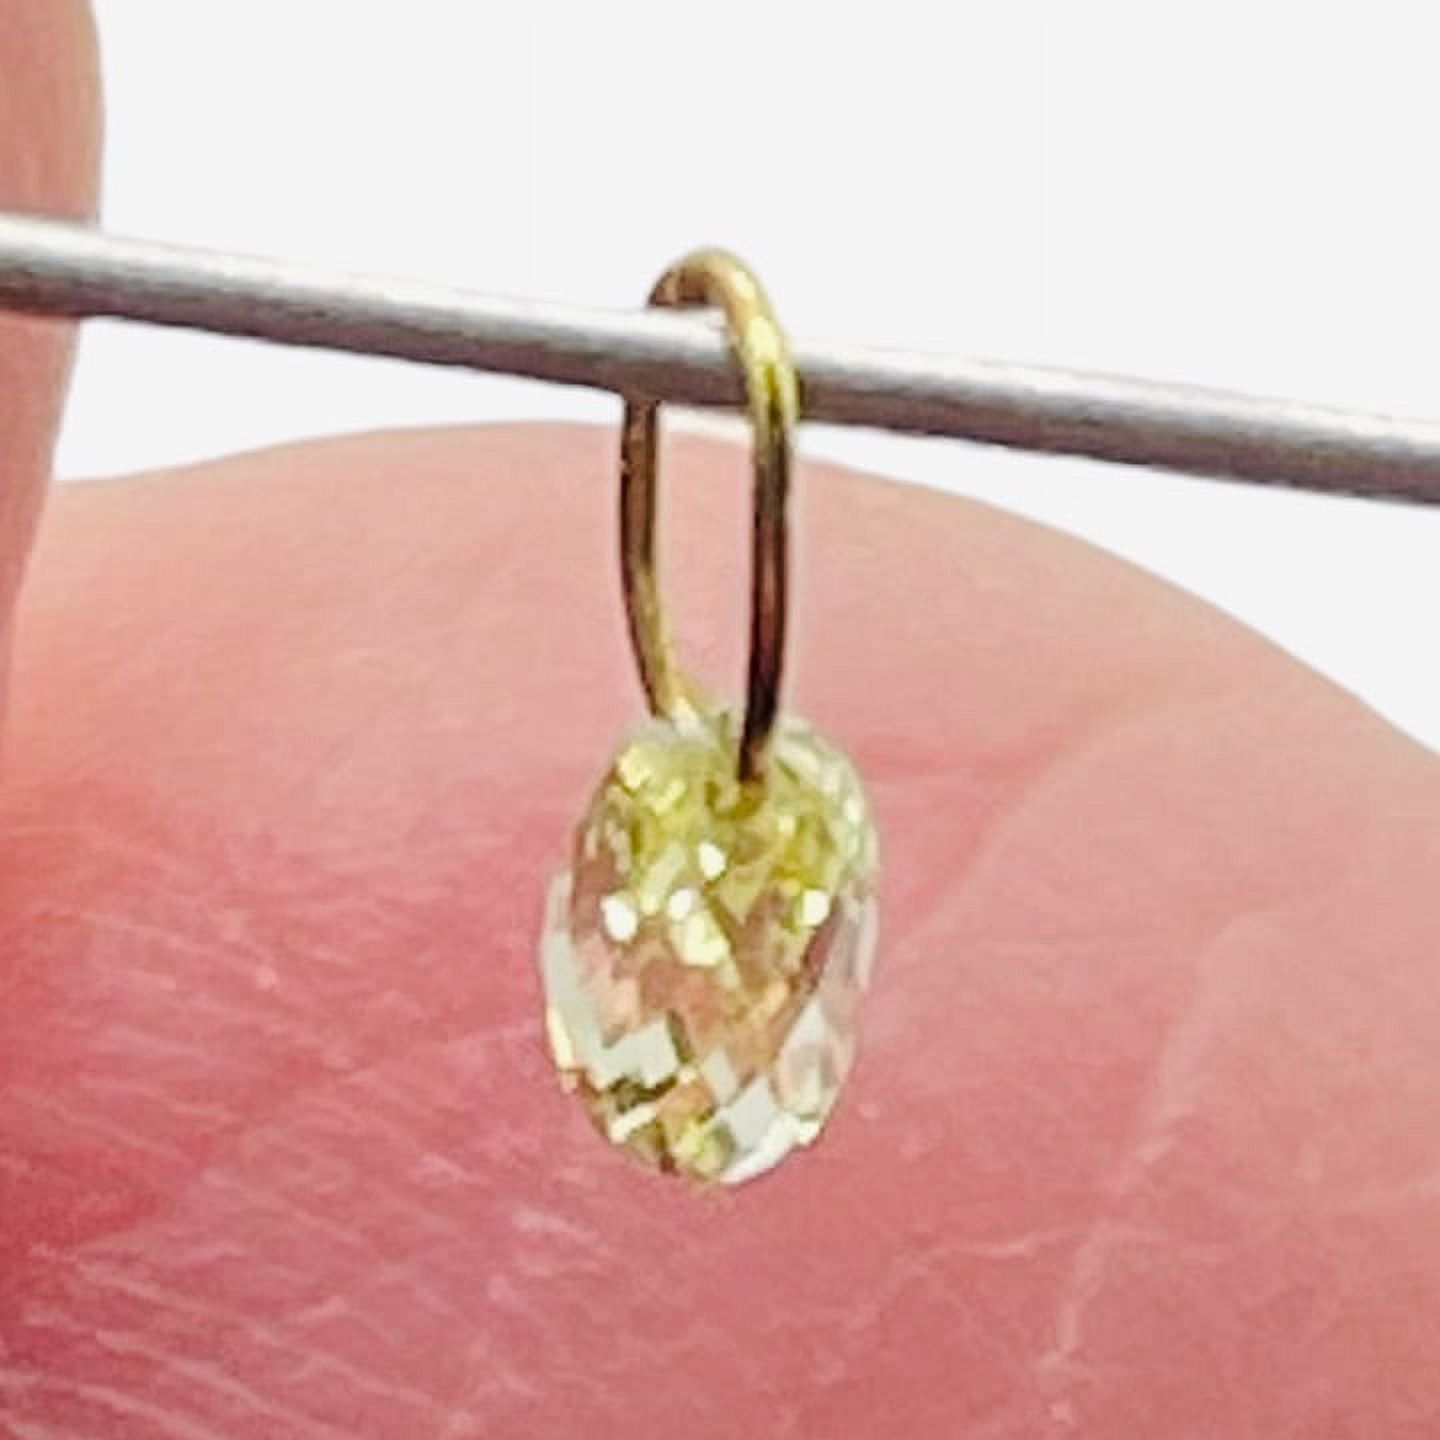 0.21cts Natural Canary 3x2.5x2mm Diamond 18K Gold Pendant 8798P - image 2 of 12